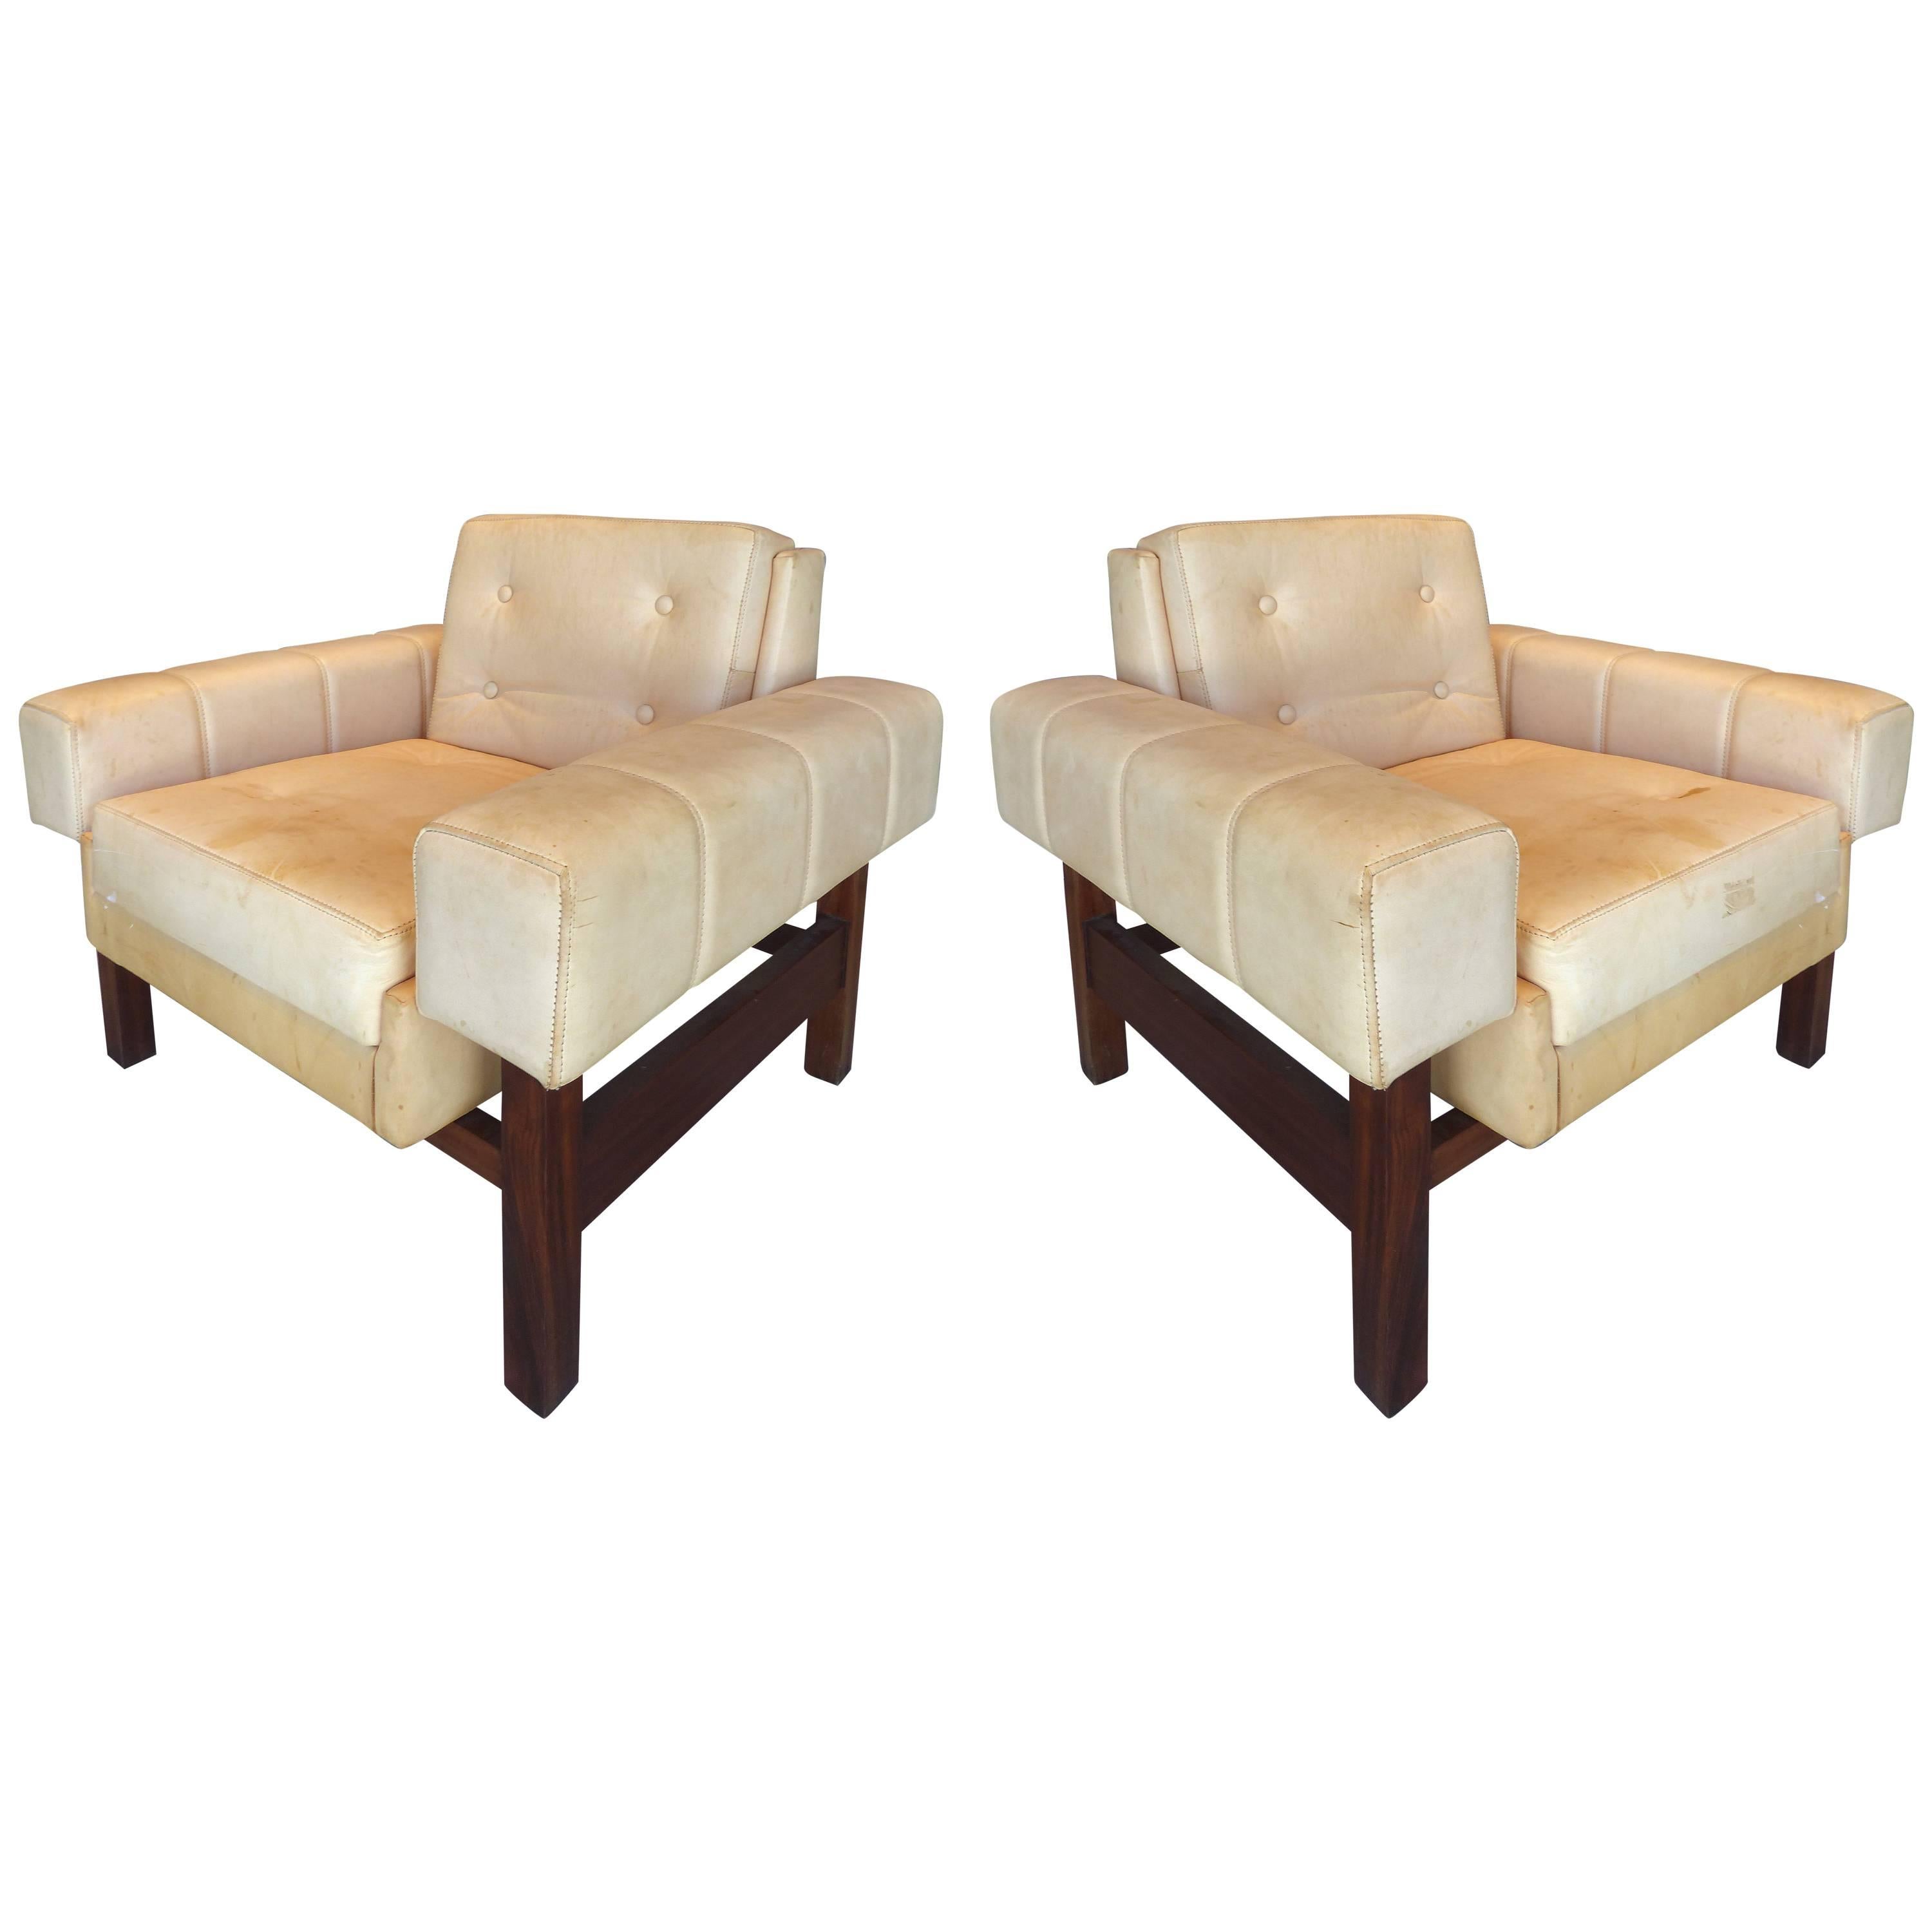 1960s Sergio Rodrigues "Navona" Club Chairs in Jacaranda and Leather, Pair